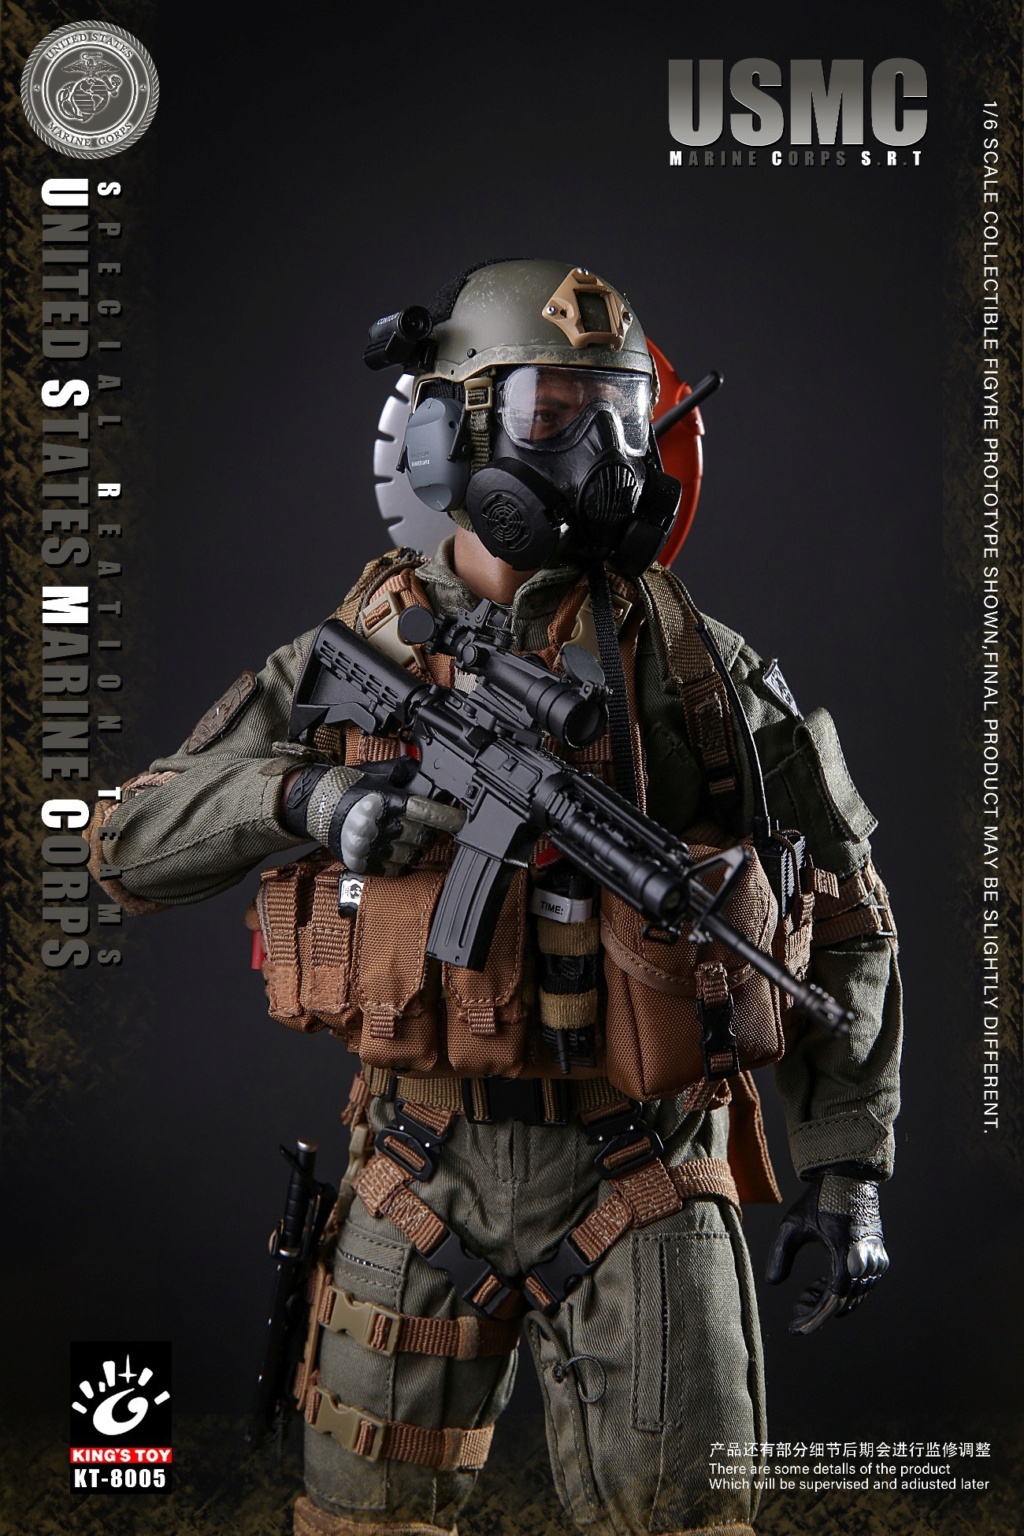 King - NEW PRODUCT: King's Toy: 1/6 USMC SRT US Marine Corps Special Response Team (#KT-8005) 09515911